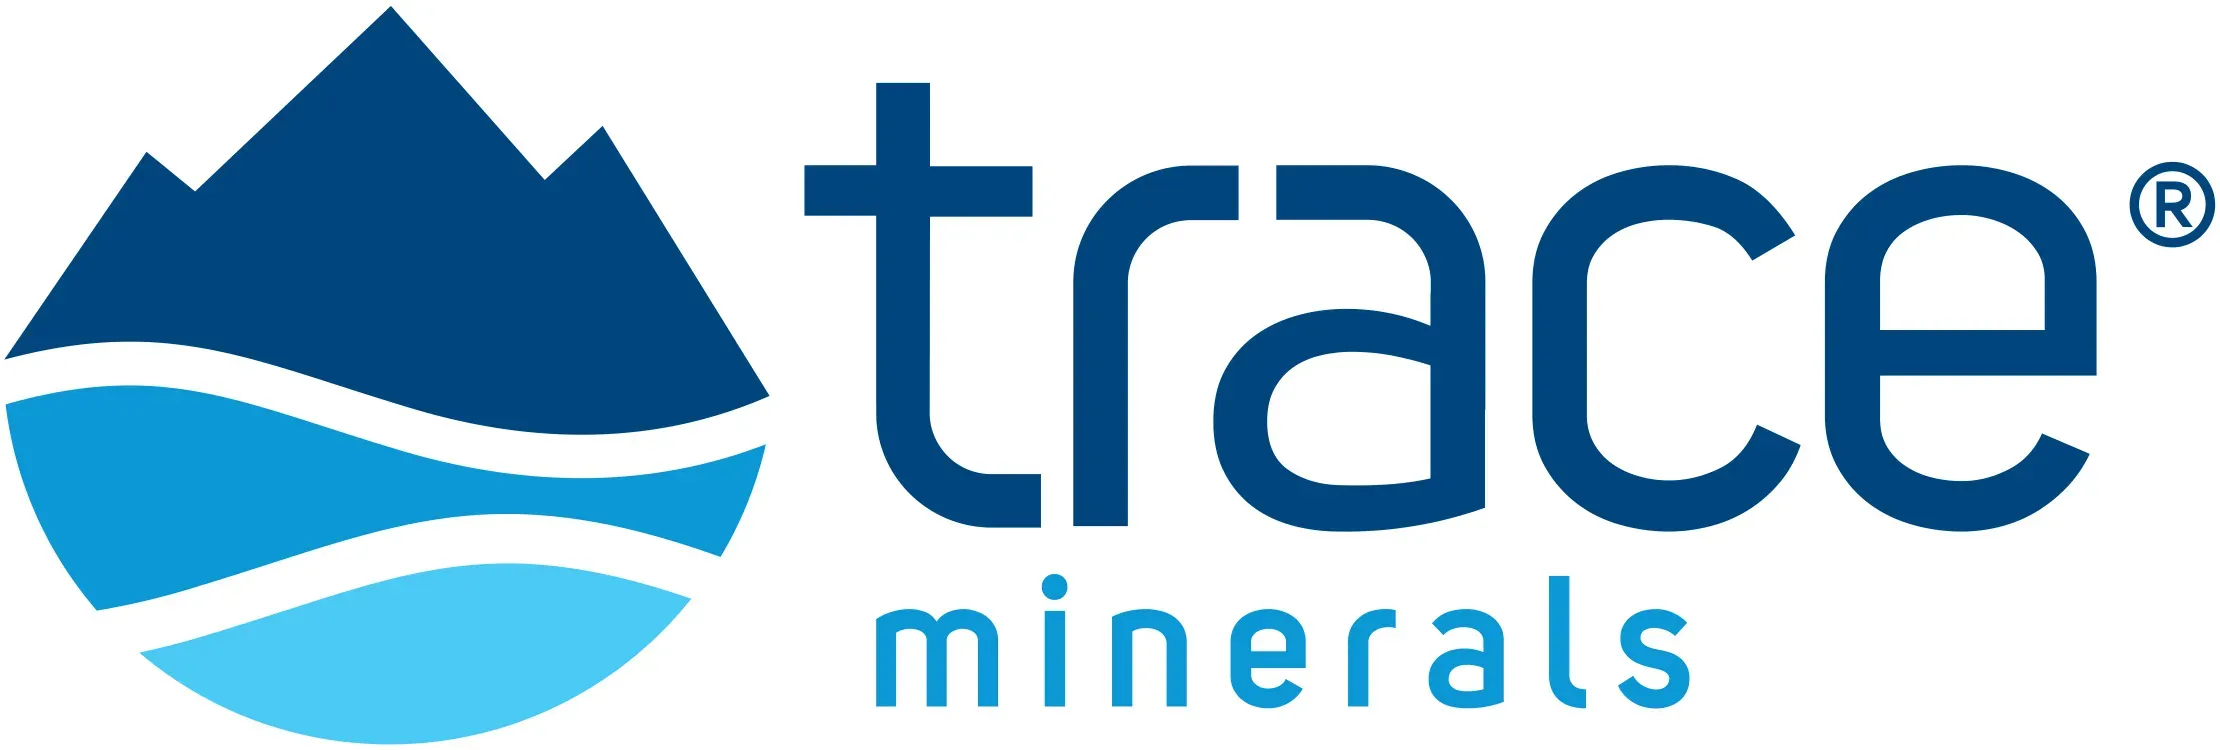 the logo for trace minerals